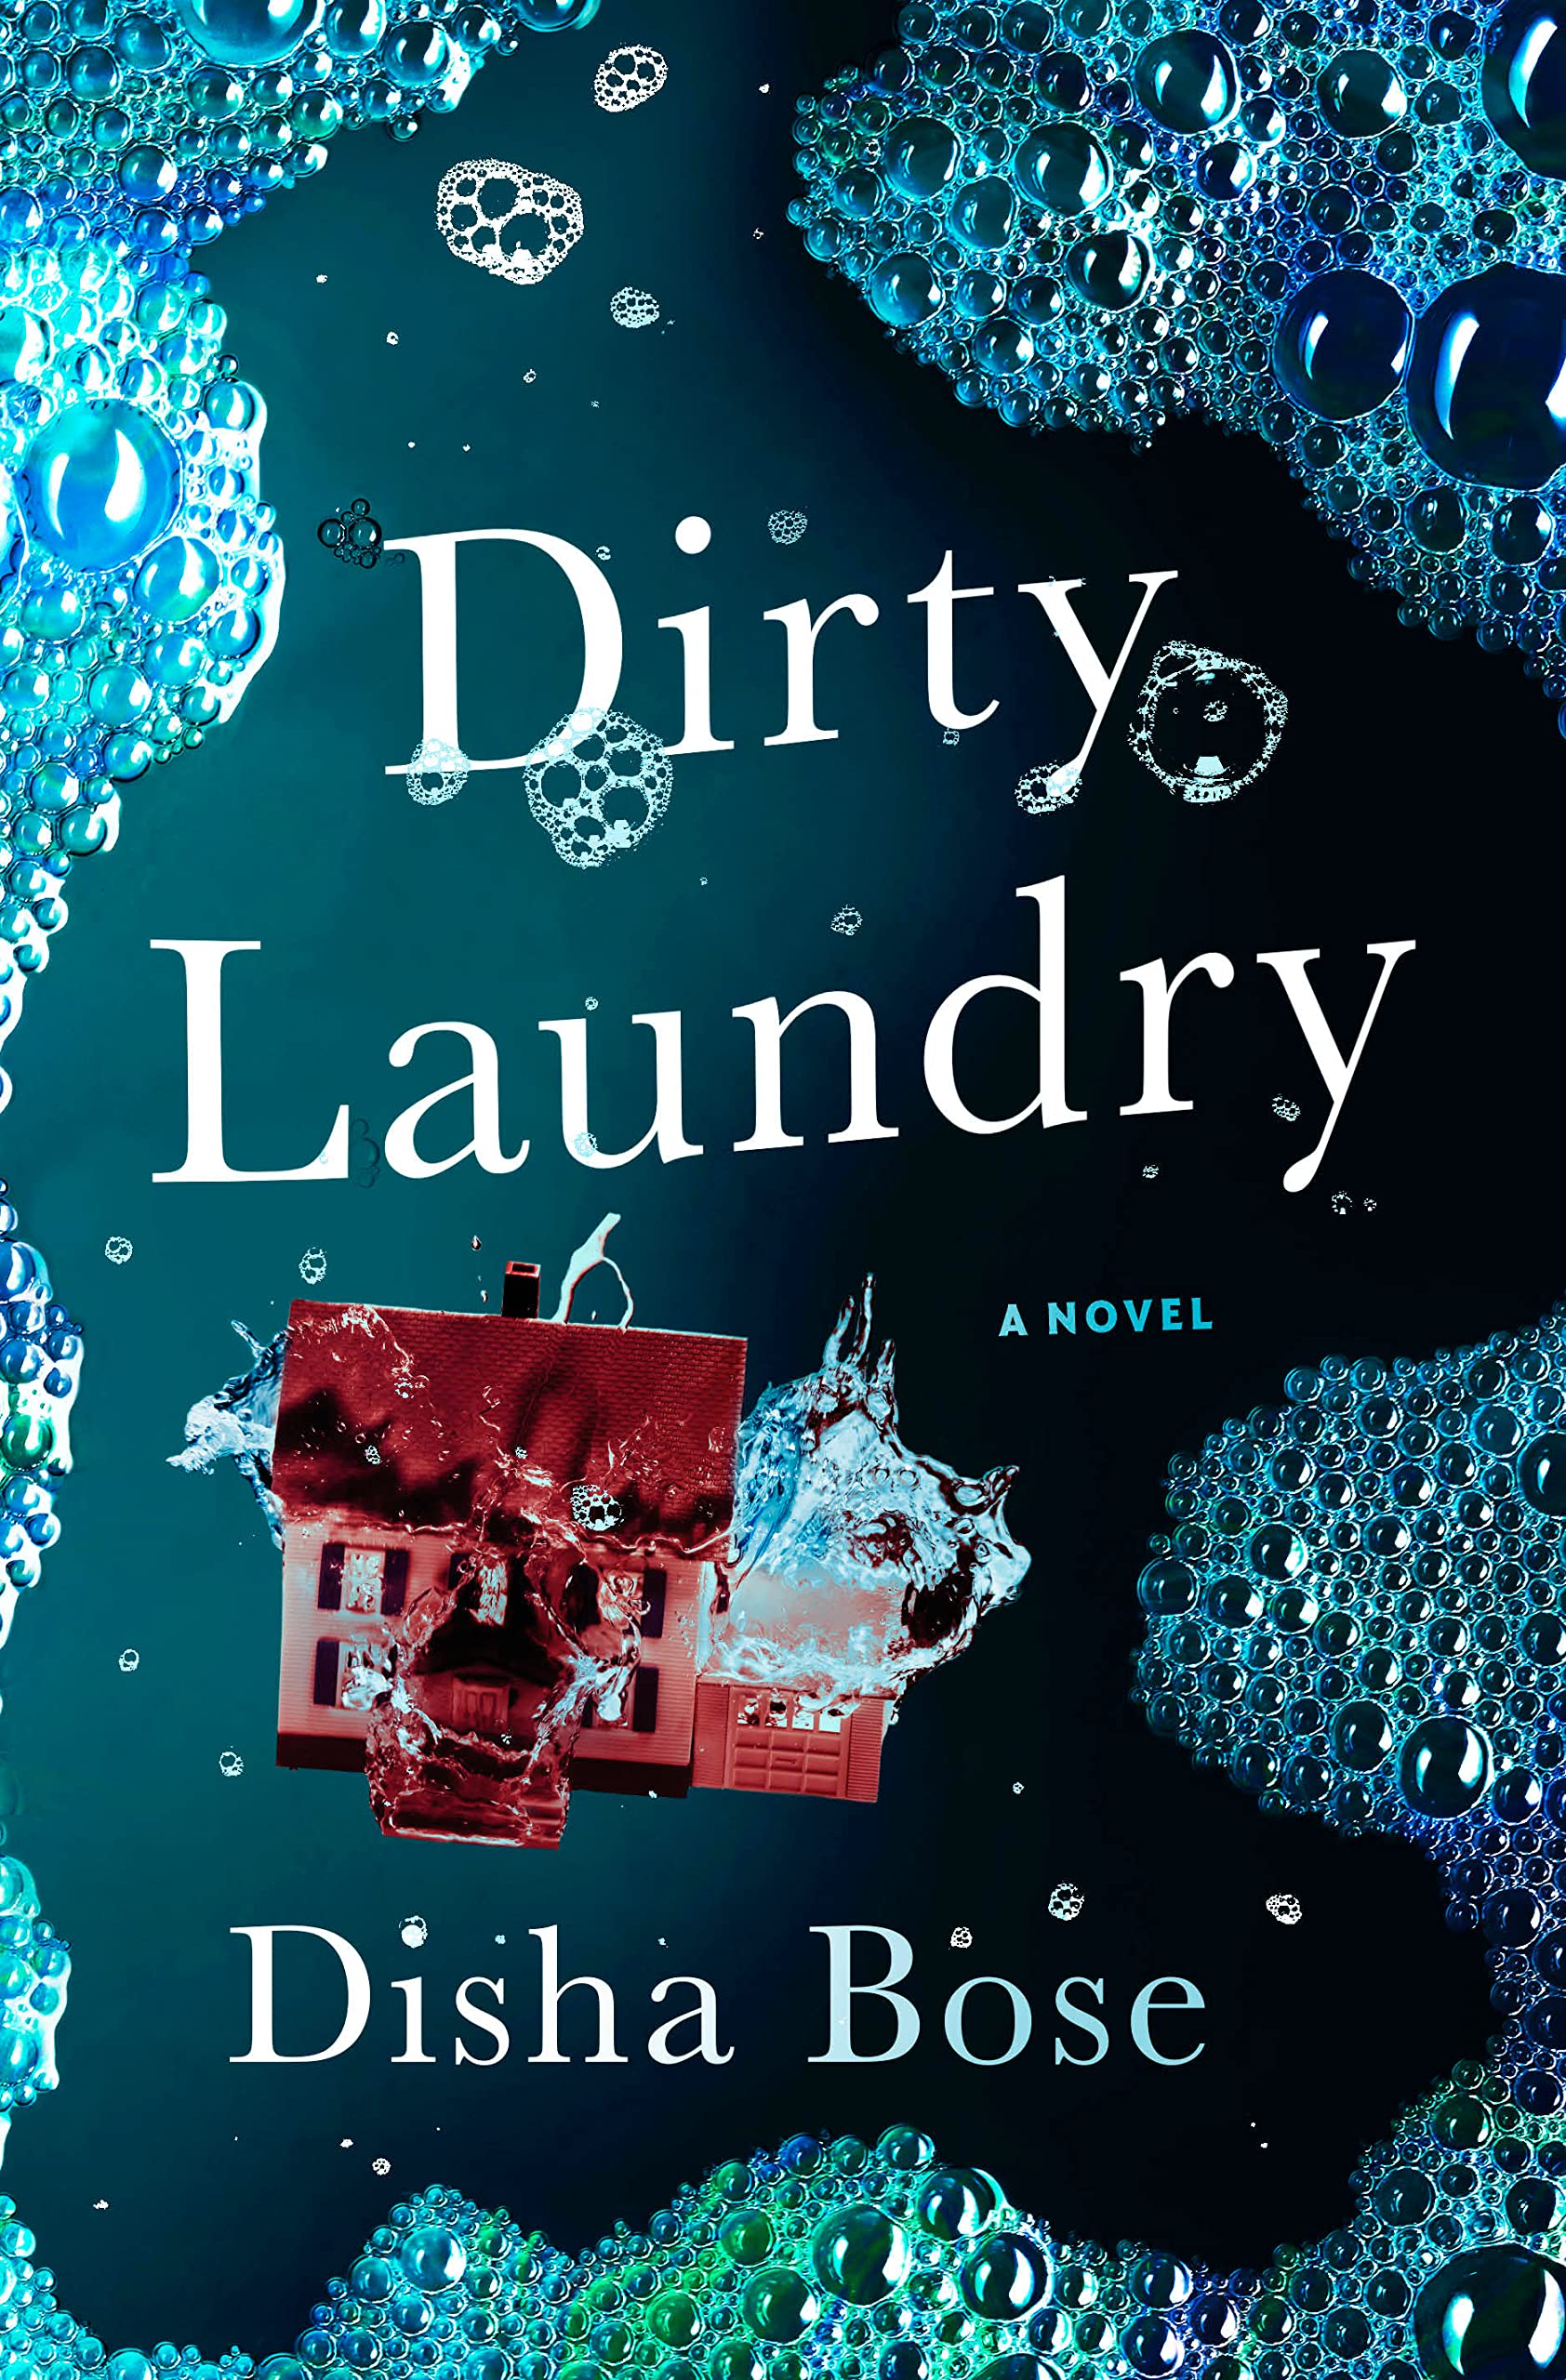 Image for "Dirty Laundry"